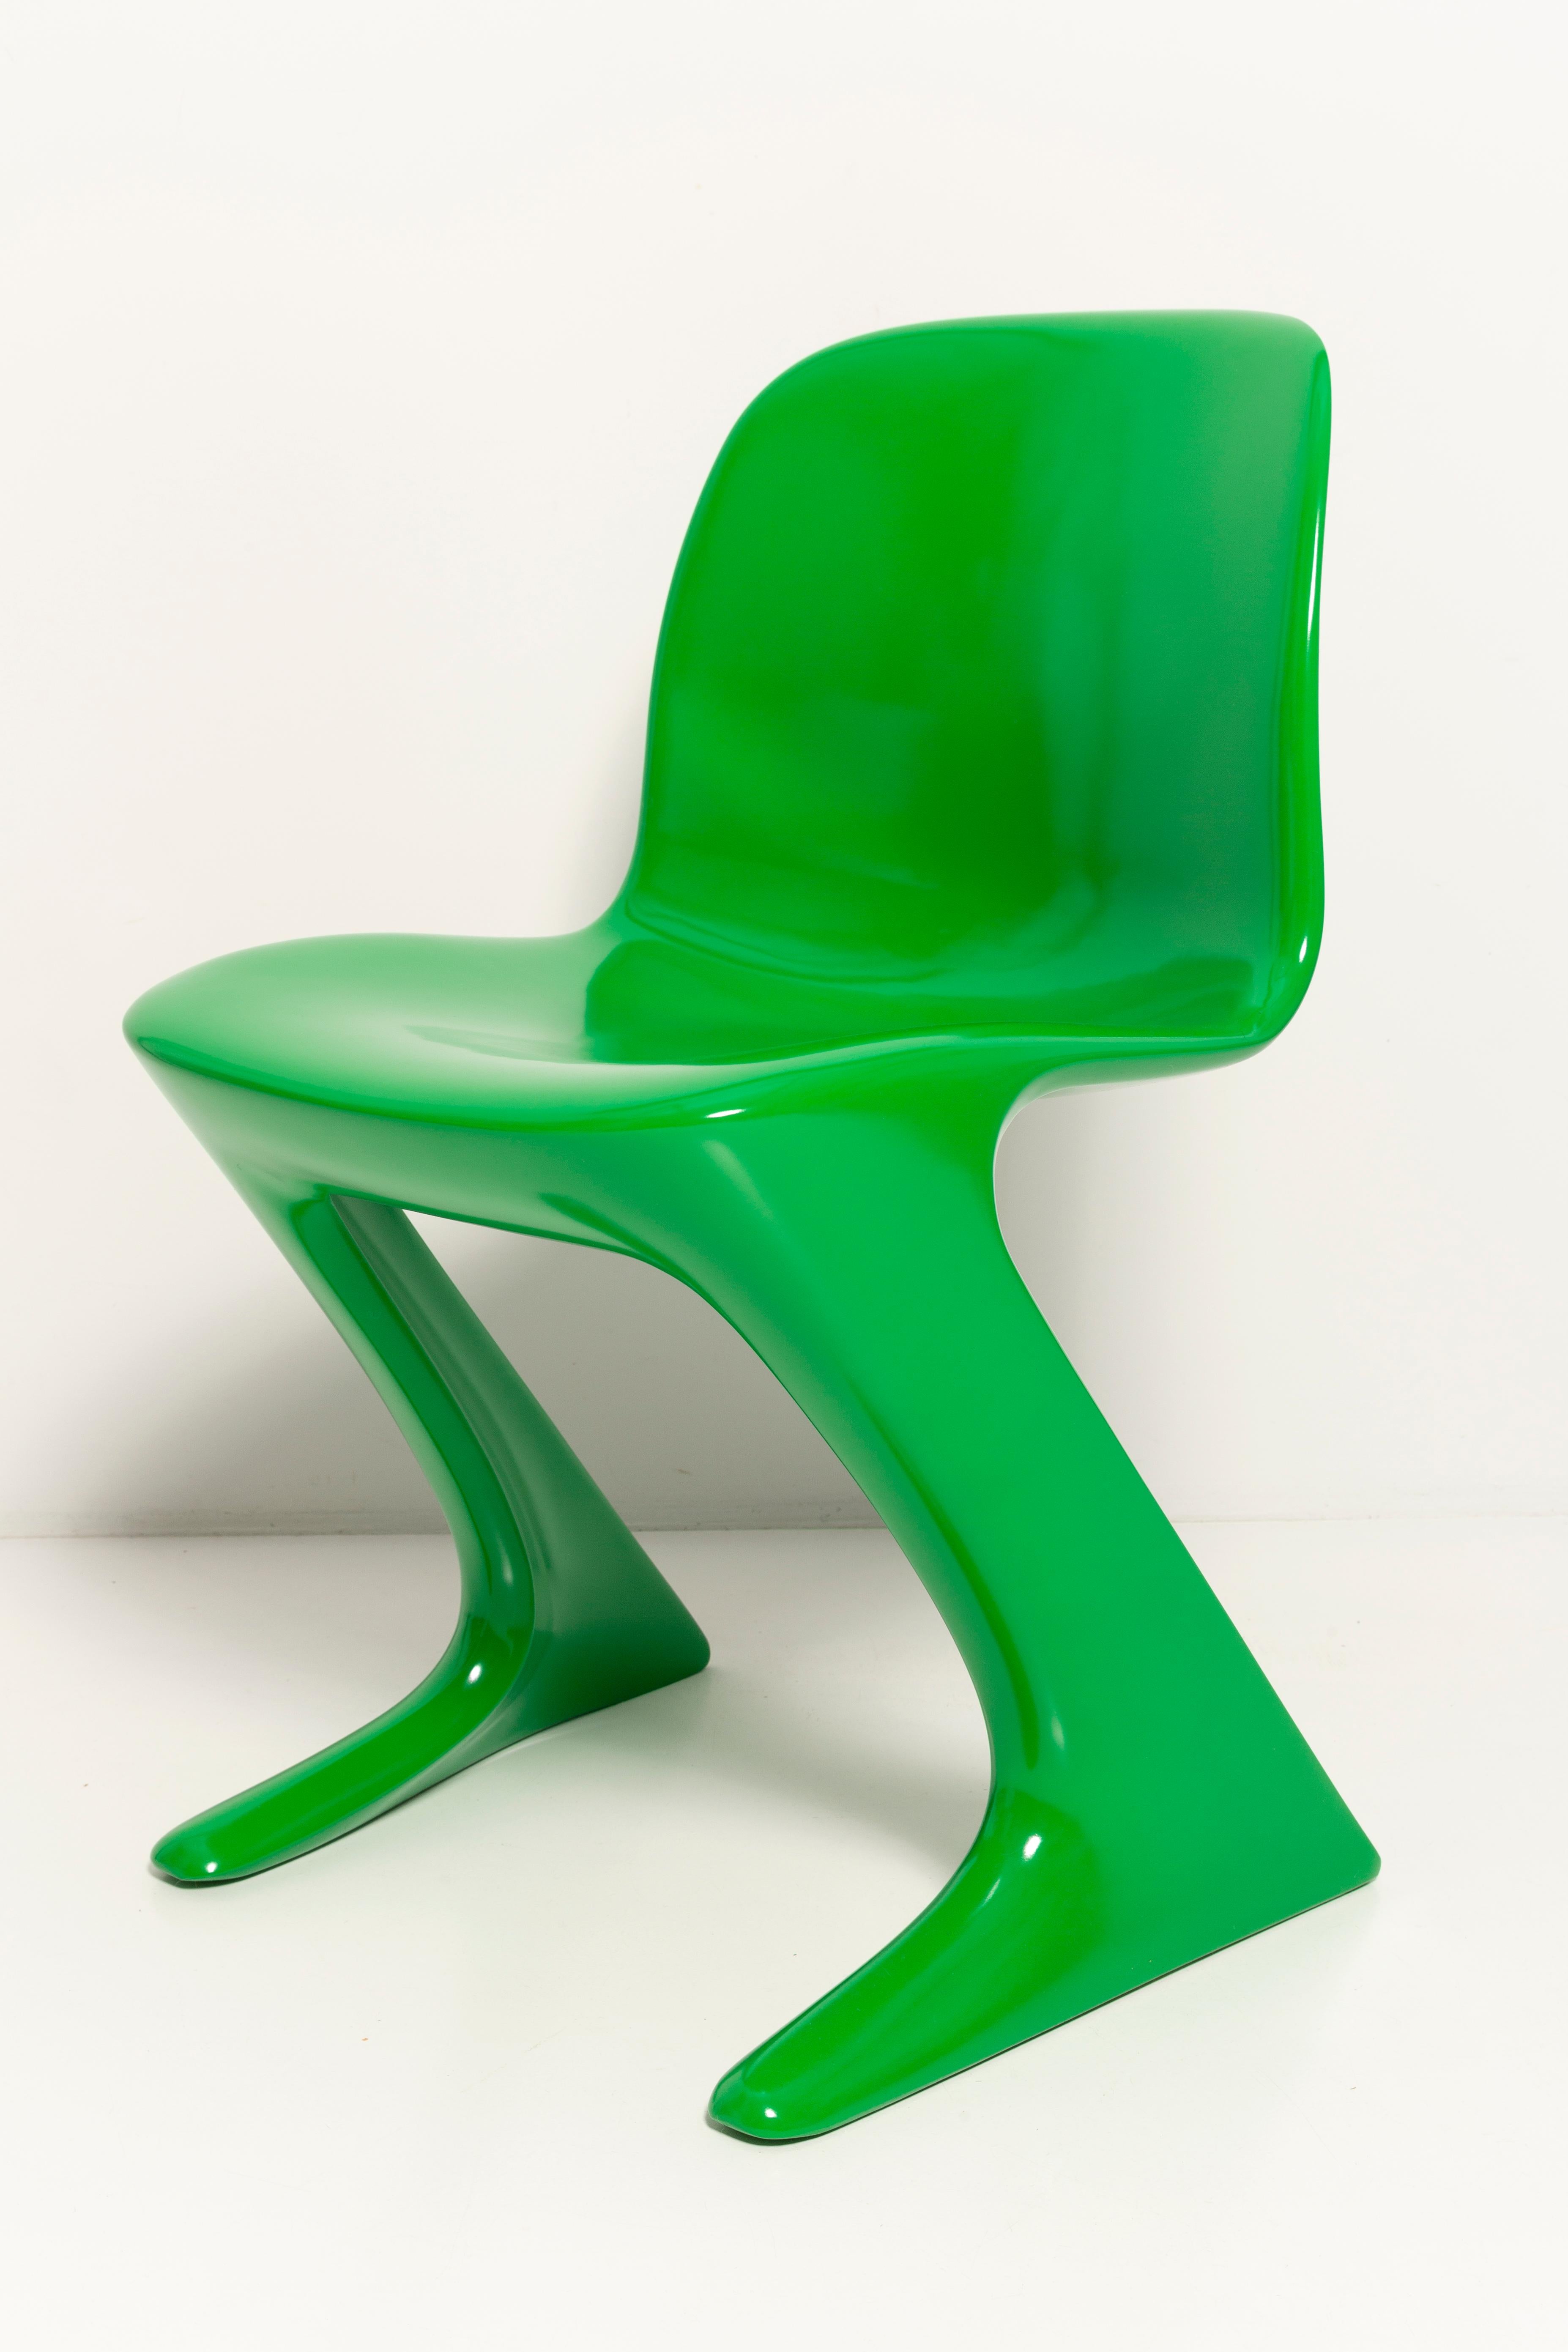 Set of Four Green Kangaroo Chairs Designed by Ernst Moeckl, Germany, 1960s For Sale 2